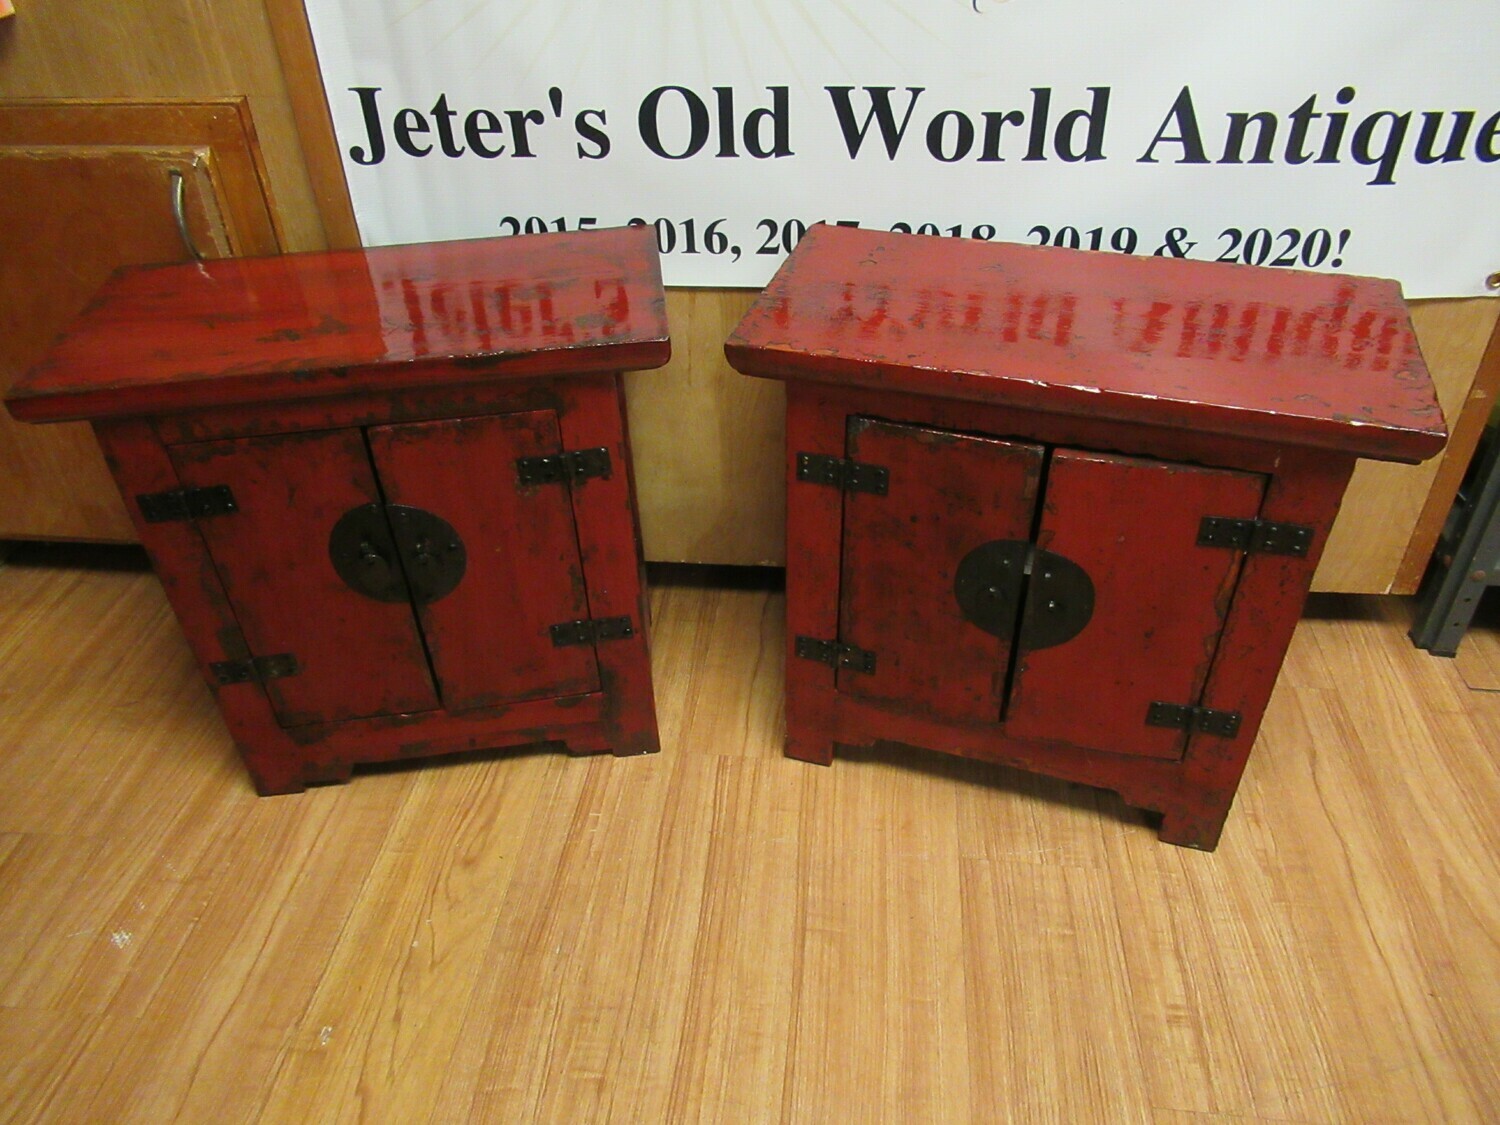 Two Antique Side Cabinets with Certificates of Antiquity